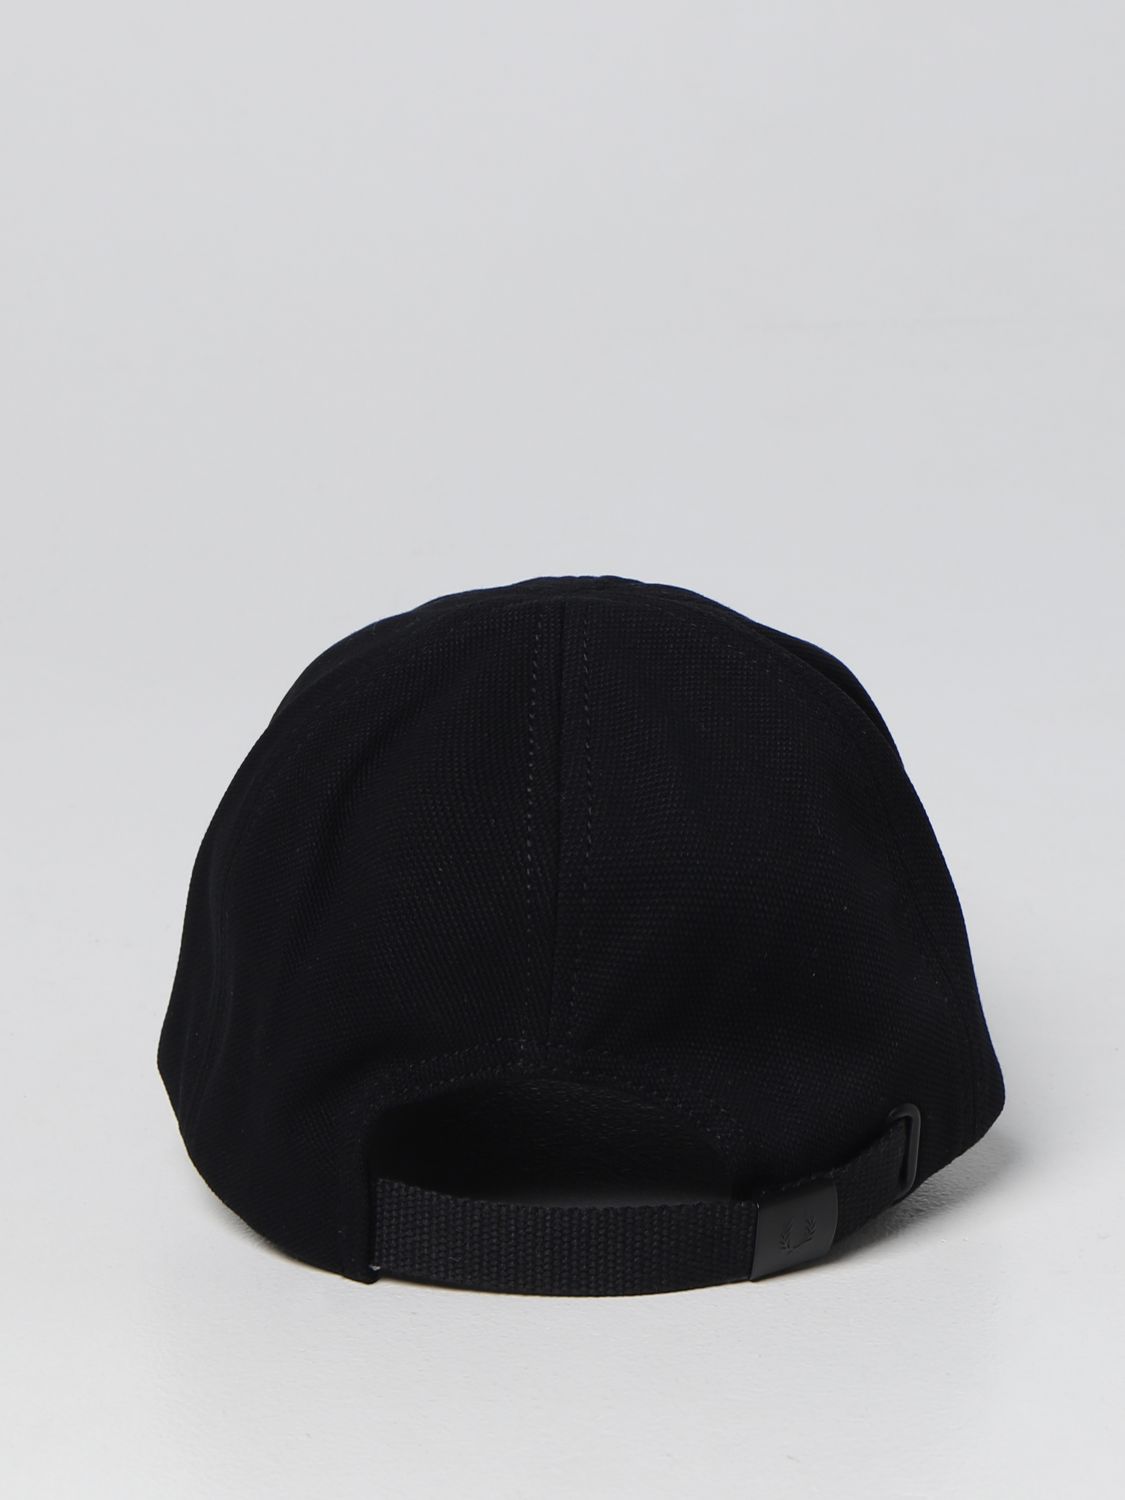 Chapeau Fred Perry: Chapeau Fred Perry homme noir 3